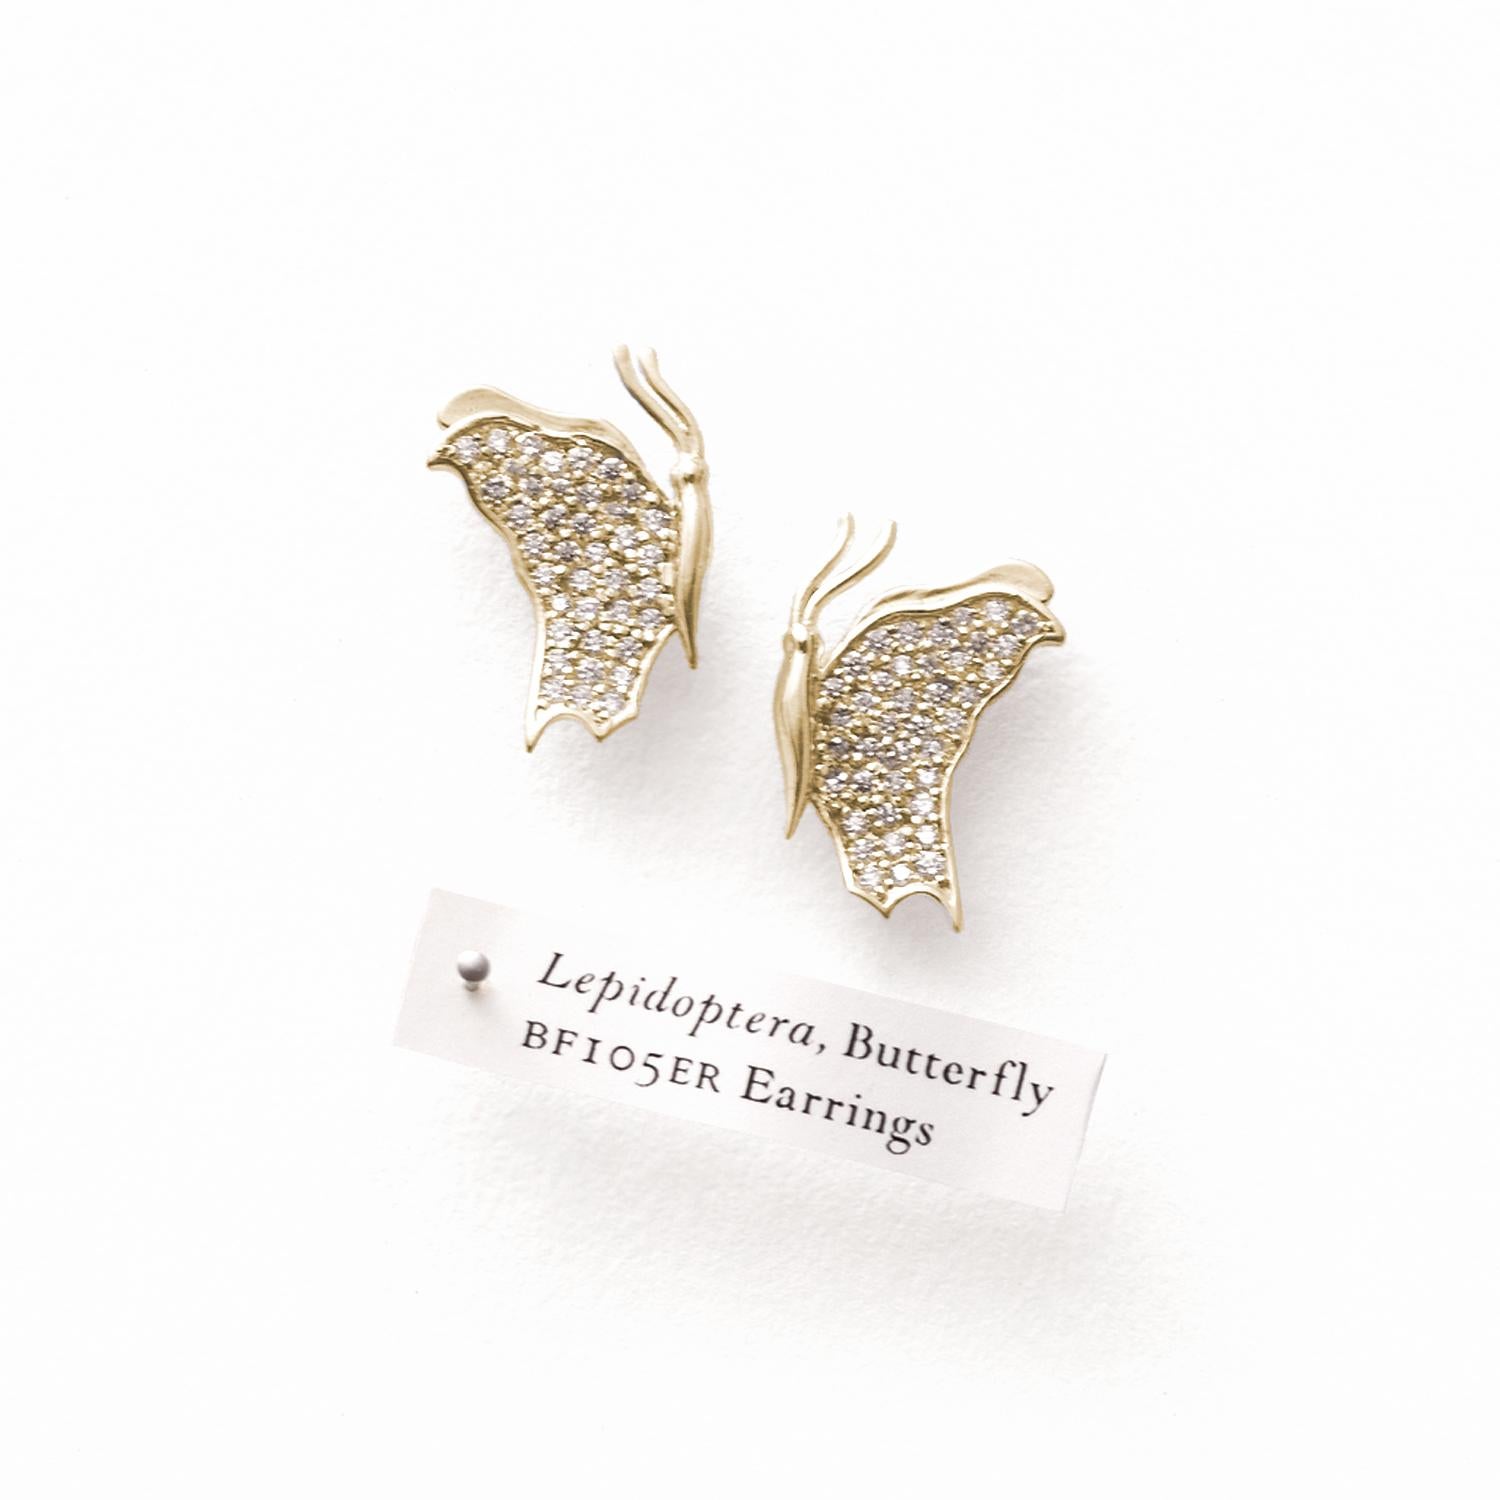 Elevate your elegance with our stunning Large Butterfly Diamond Earrings. Designed to capture attention, these exquisite stud post earrings will make you feel as if real butterflies have gracefully landed on your earlobes.

Crafted with meticulous